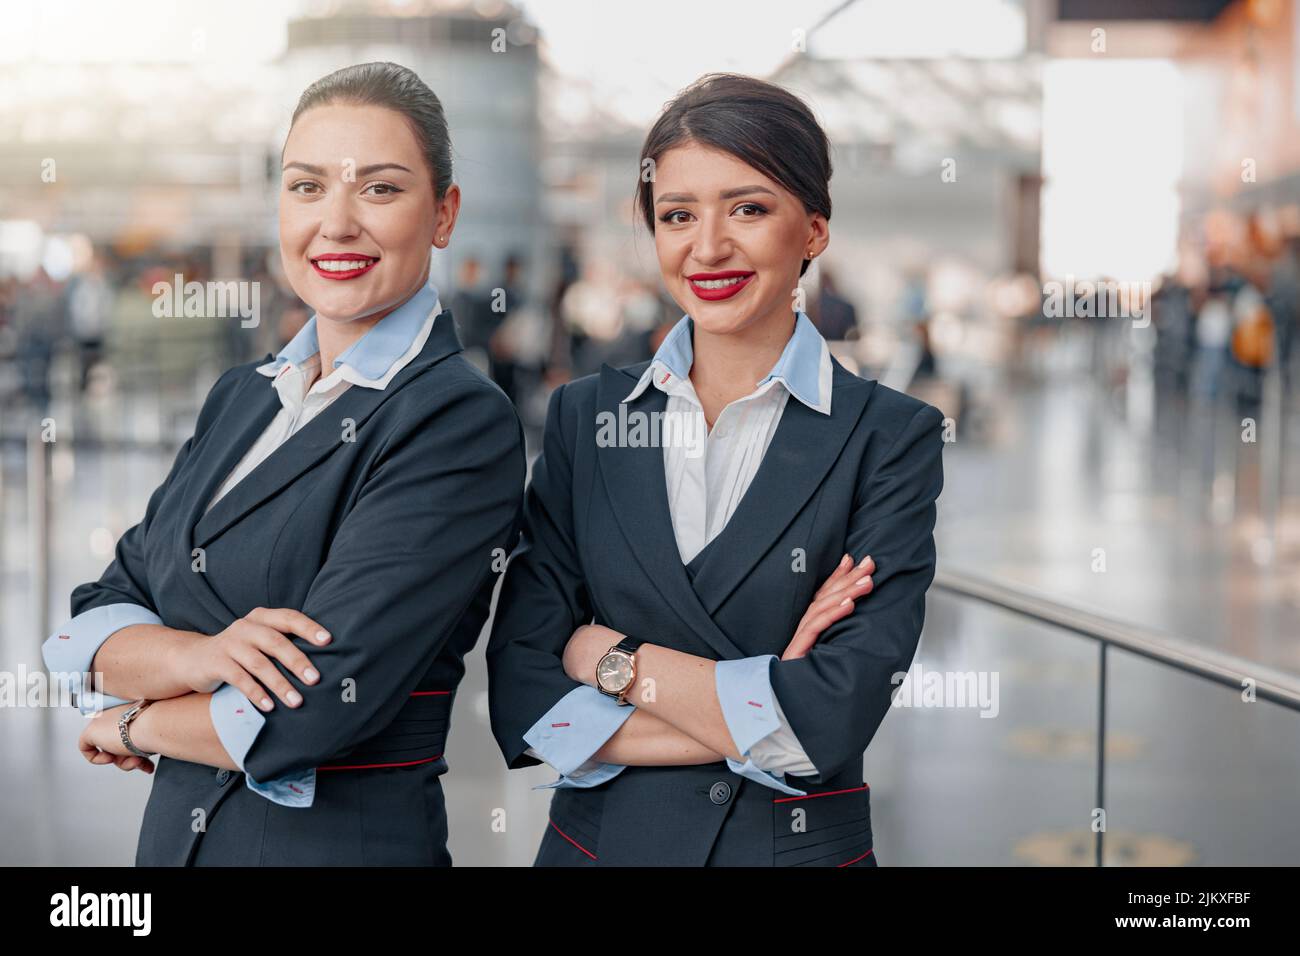 Smiling stewardesses with arms crossed standing in airport terminal Stock Photo